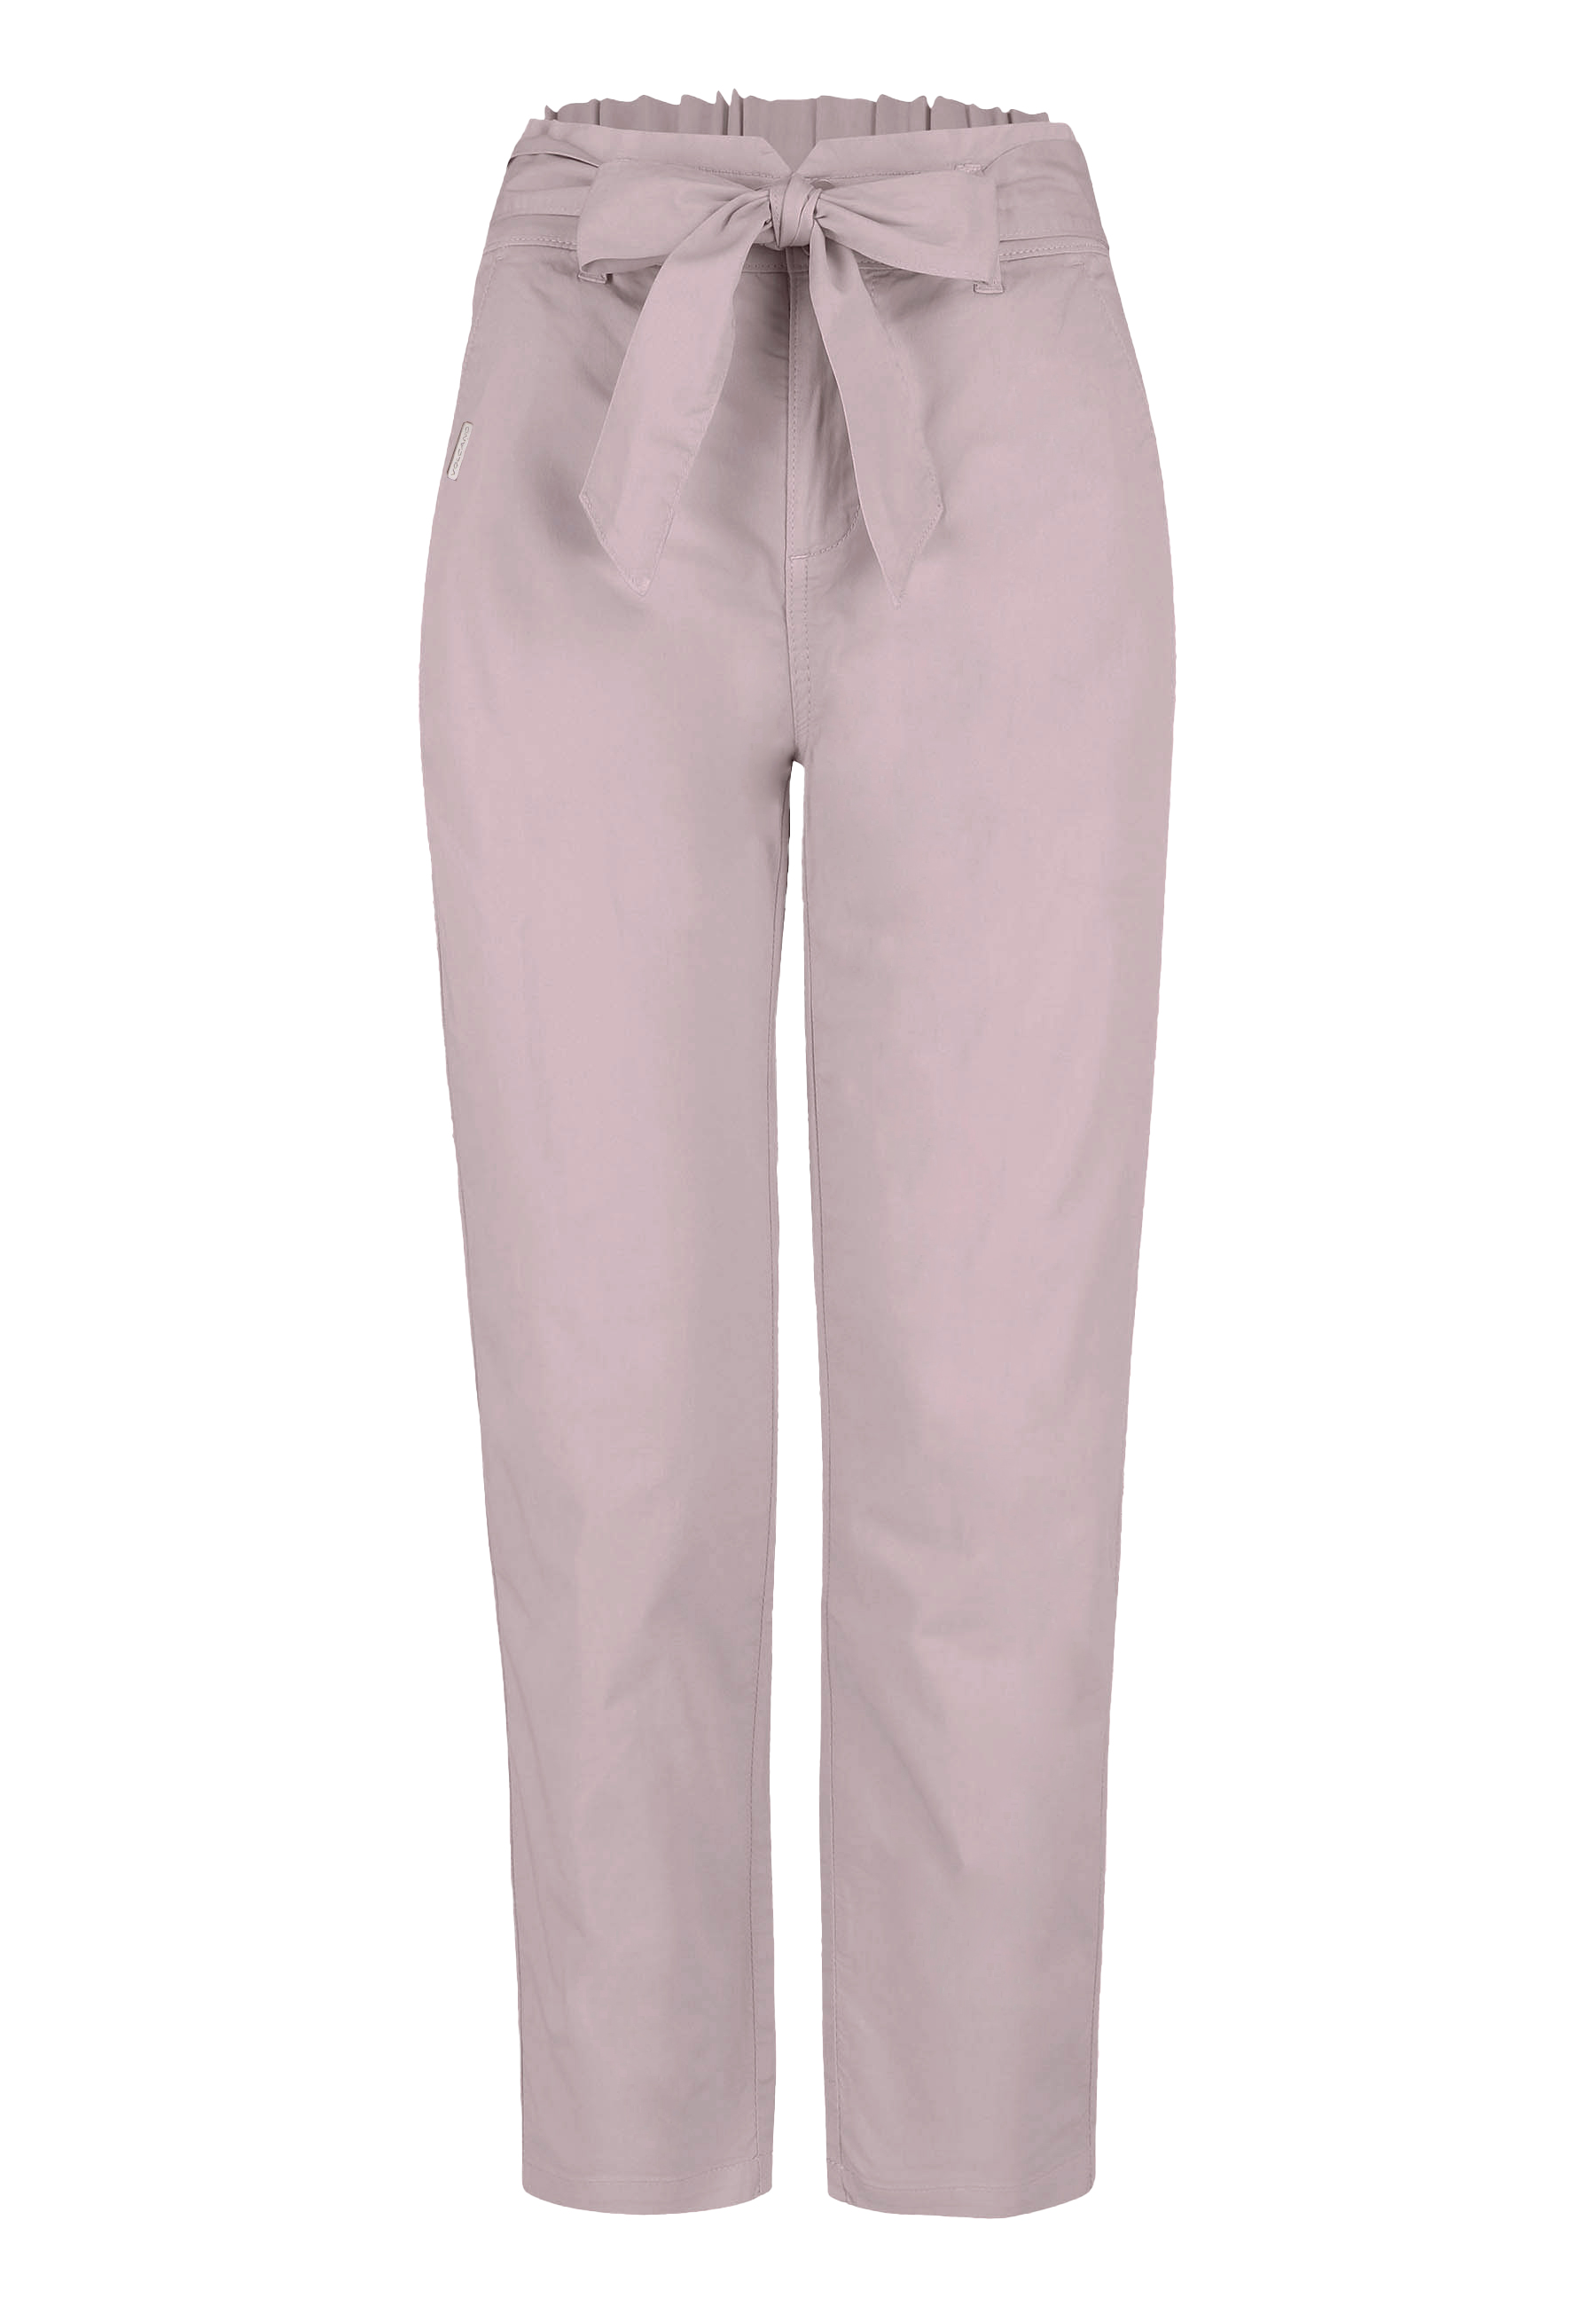 Volcano Woman's Trousers R-ROSE